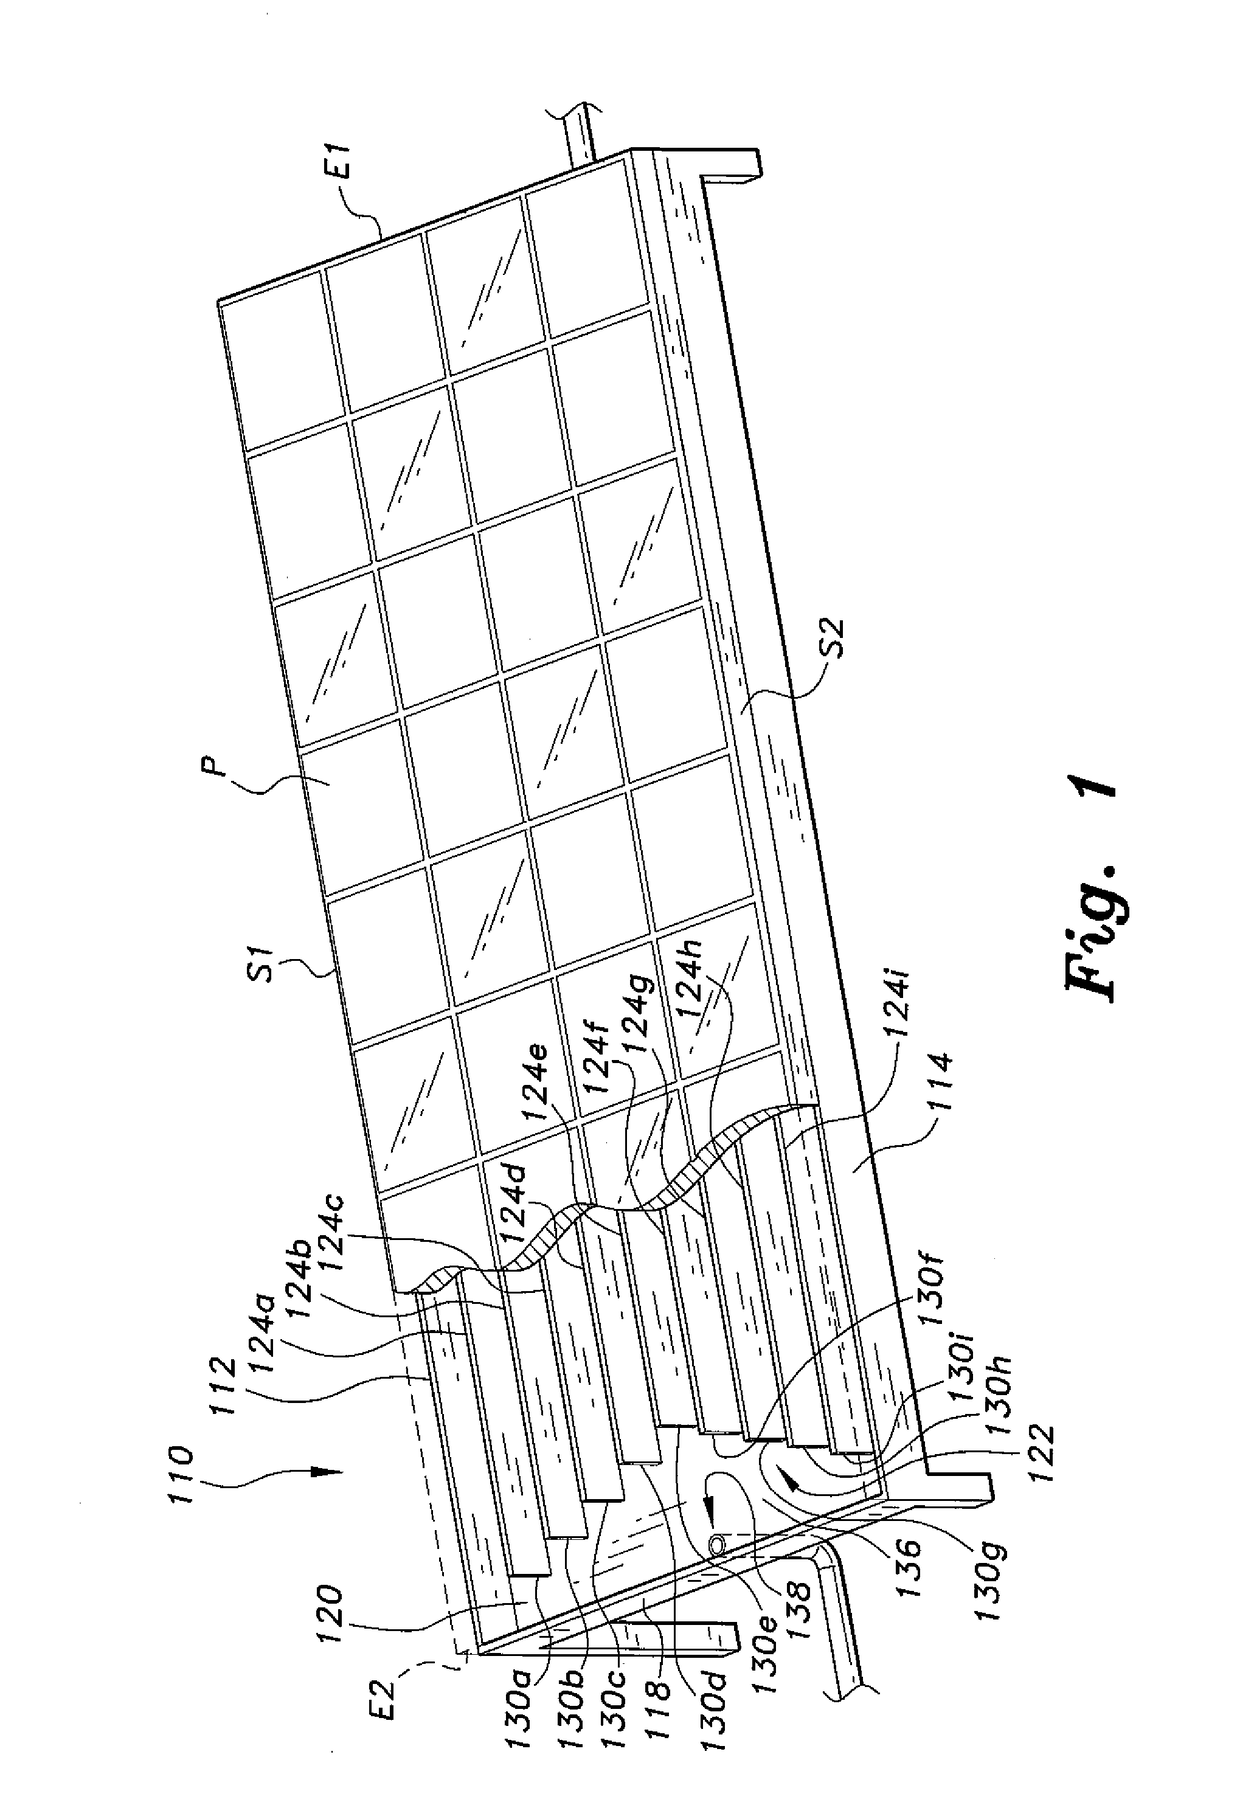 Heat exchanger for photovoltaic panels